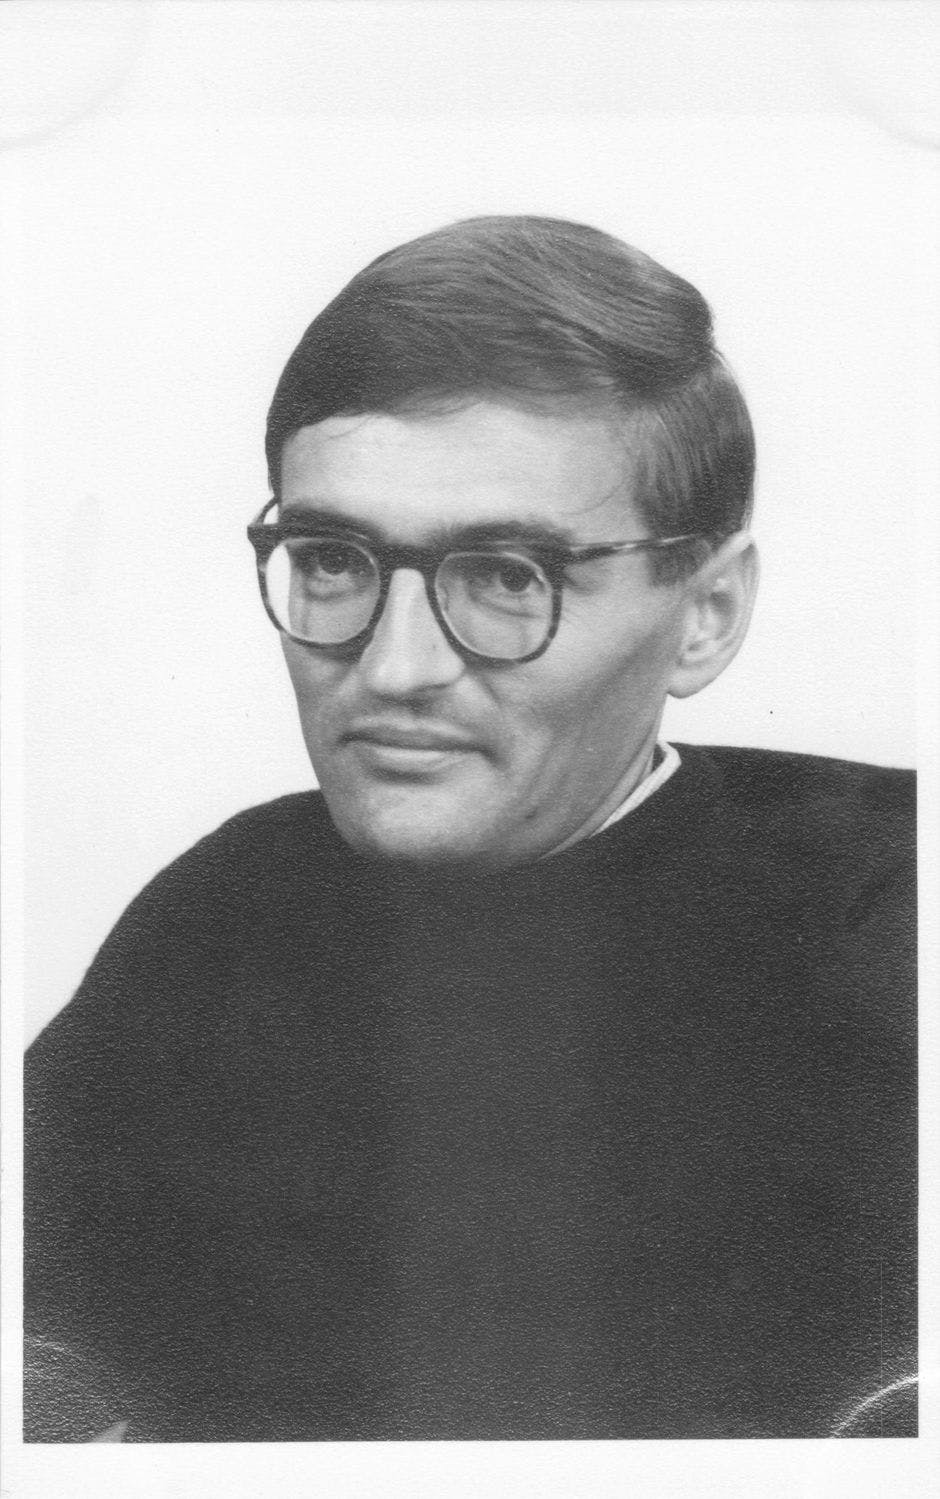 A black and white photo portrait of a man with glasses